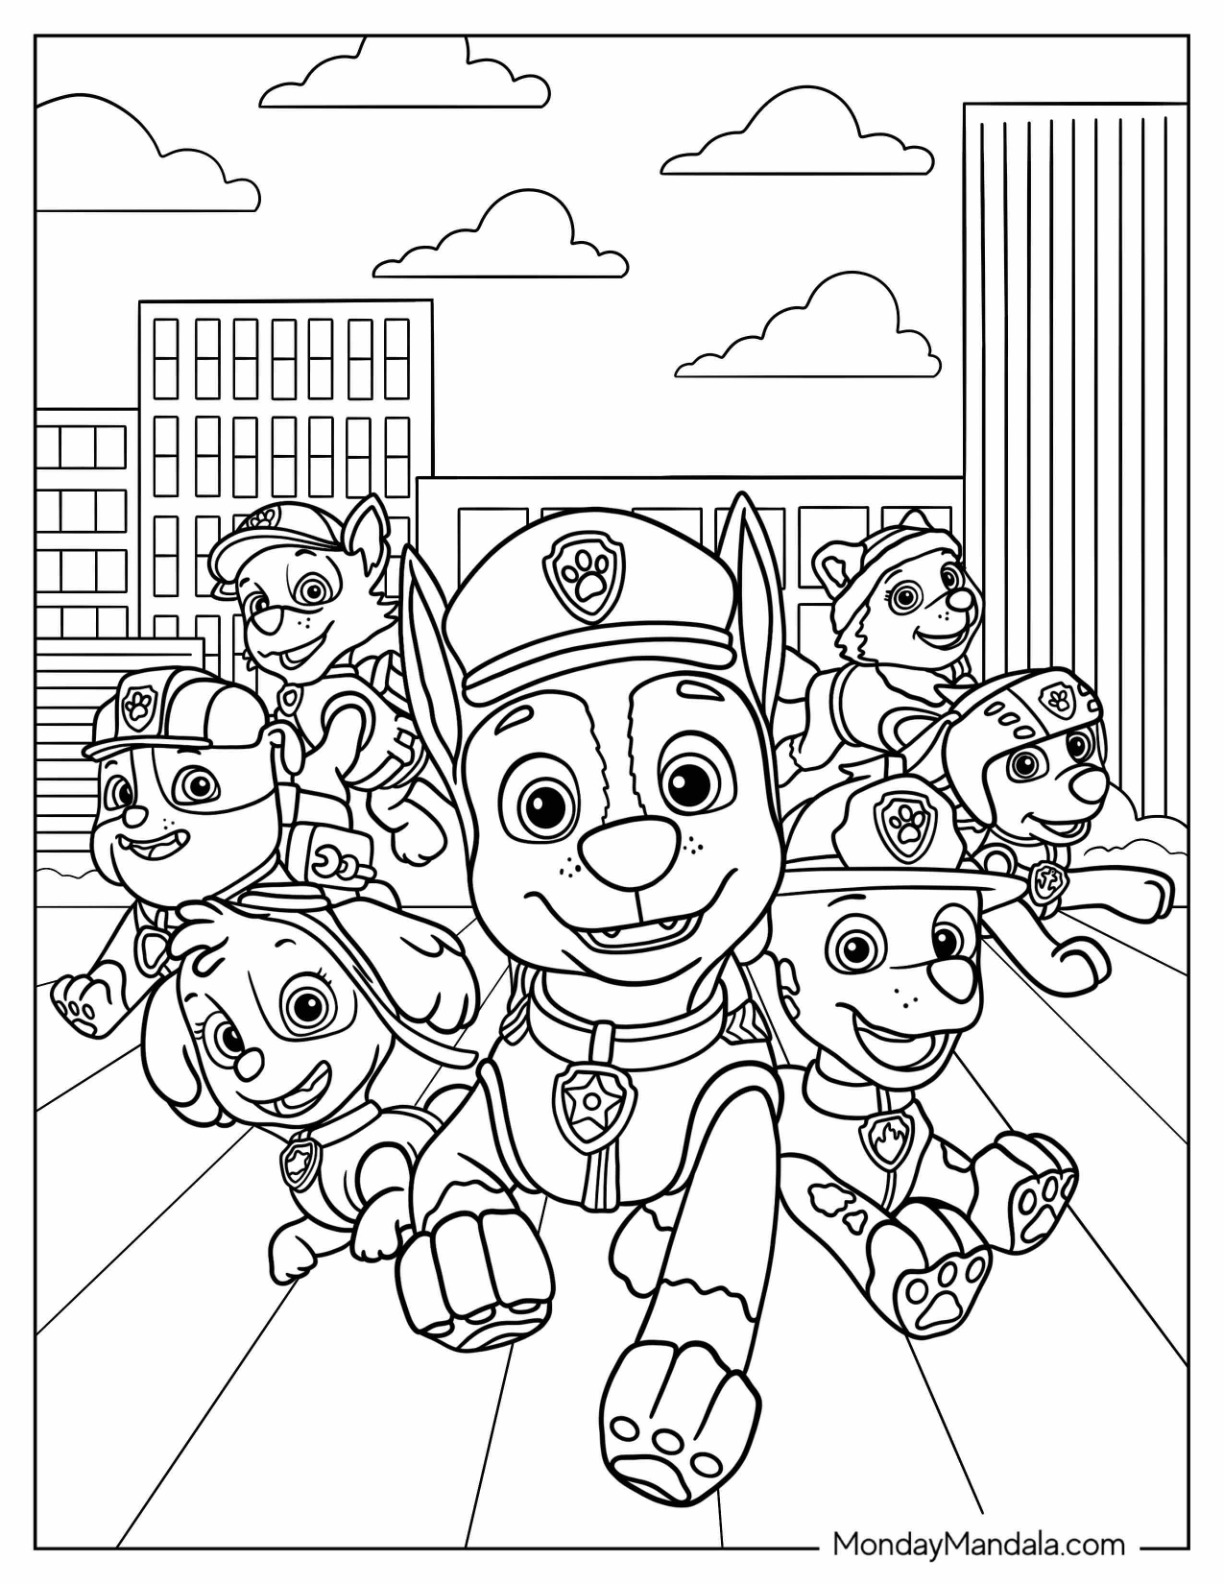 Cartoon coloring pages free pdf printables